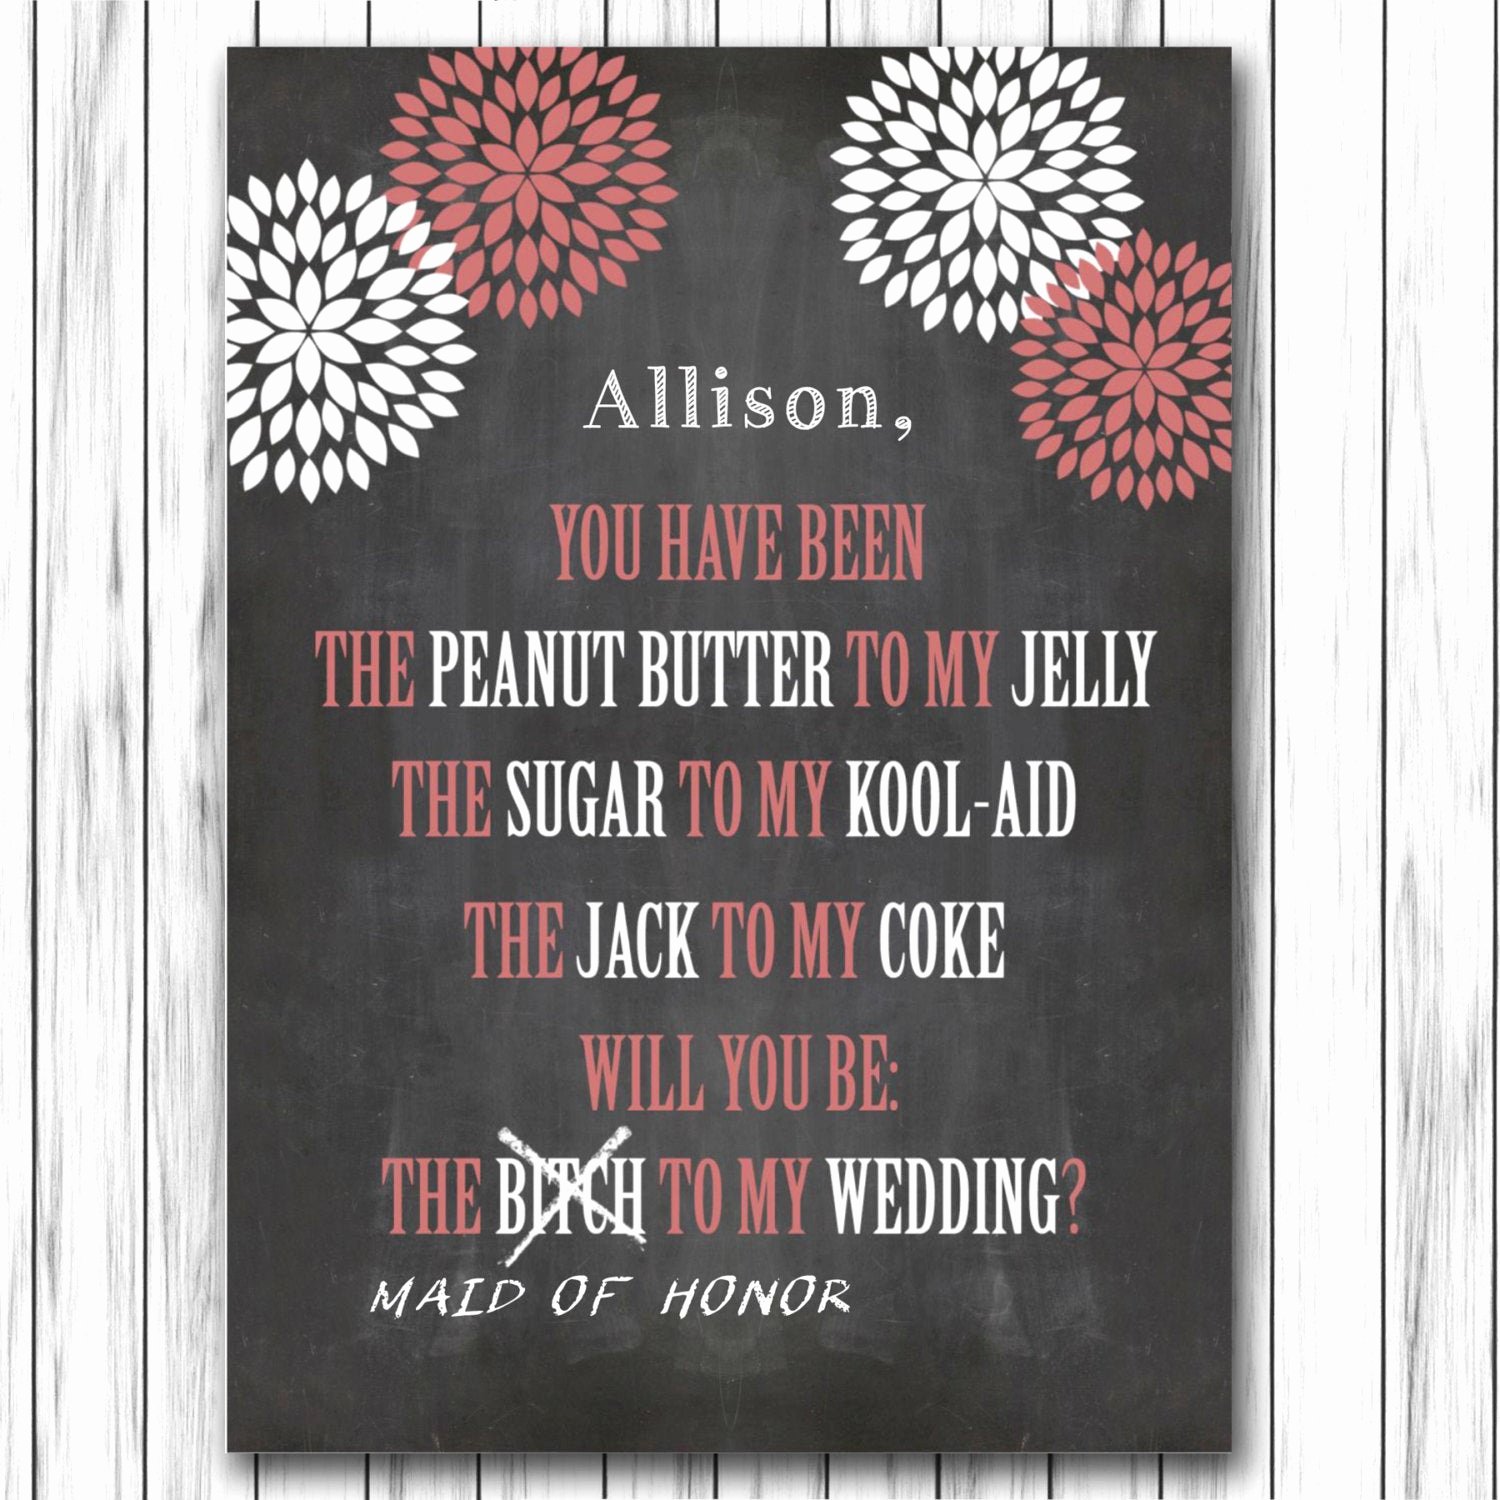 Maid Of Honor Card Template Beautiful Will You Be My Bridesmaid Card Download by Diyweddinginvites